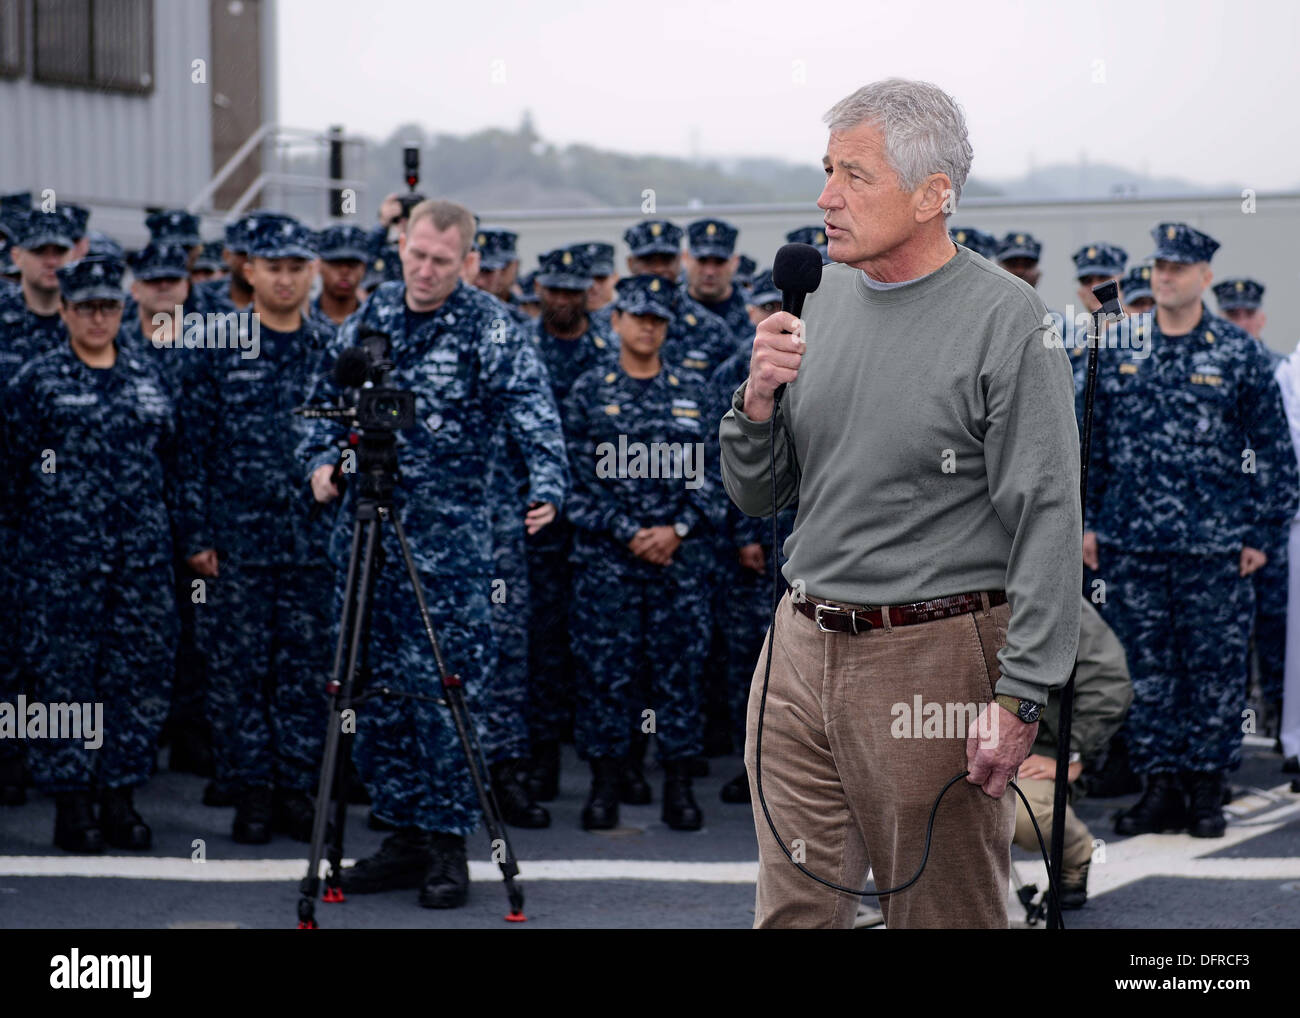 Secretary of Defense (SECDEF) Chuck Hagel speaks to the crew of the guided-missile destroyer USS Stethem (DDG 63) during his visit to Commander, Fleet Activities Yokosuka. Hagel is visiting Yokosuka as part of a weeklong trip to the region aimed at foster Stock Photo